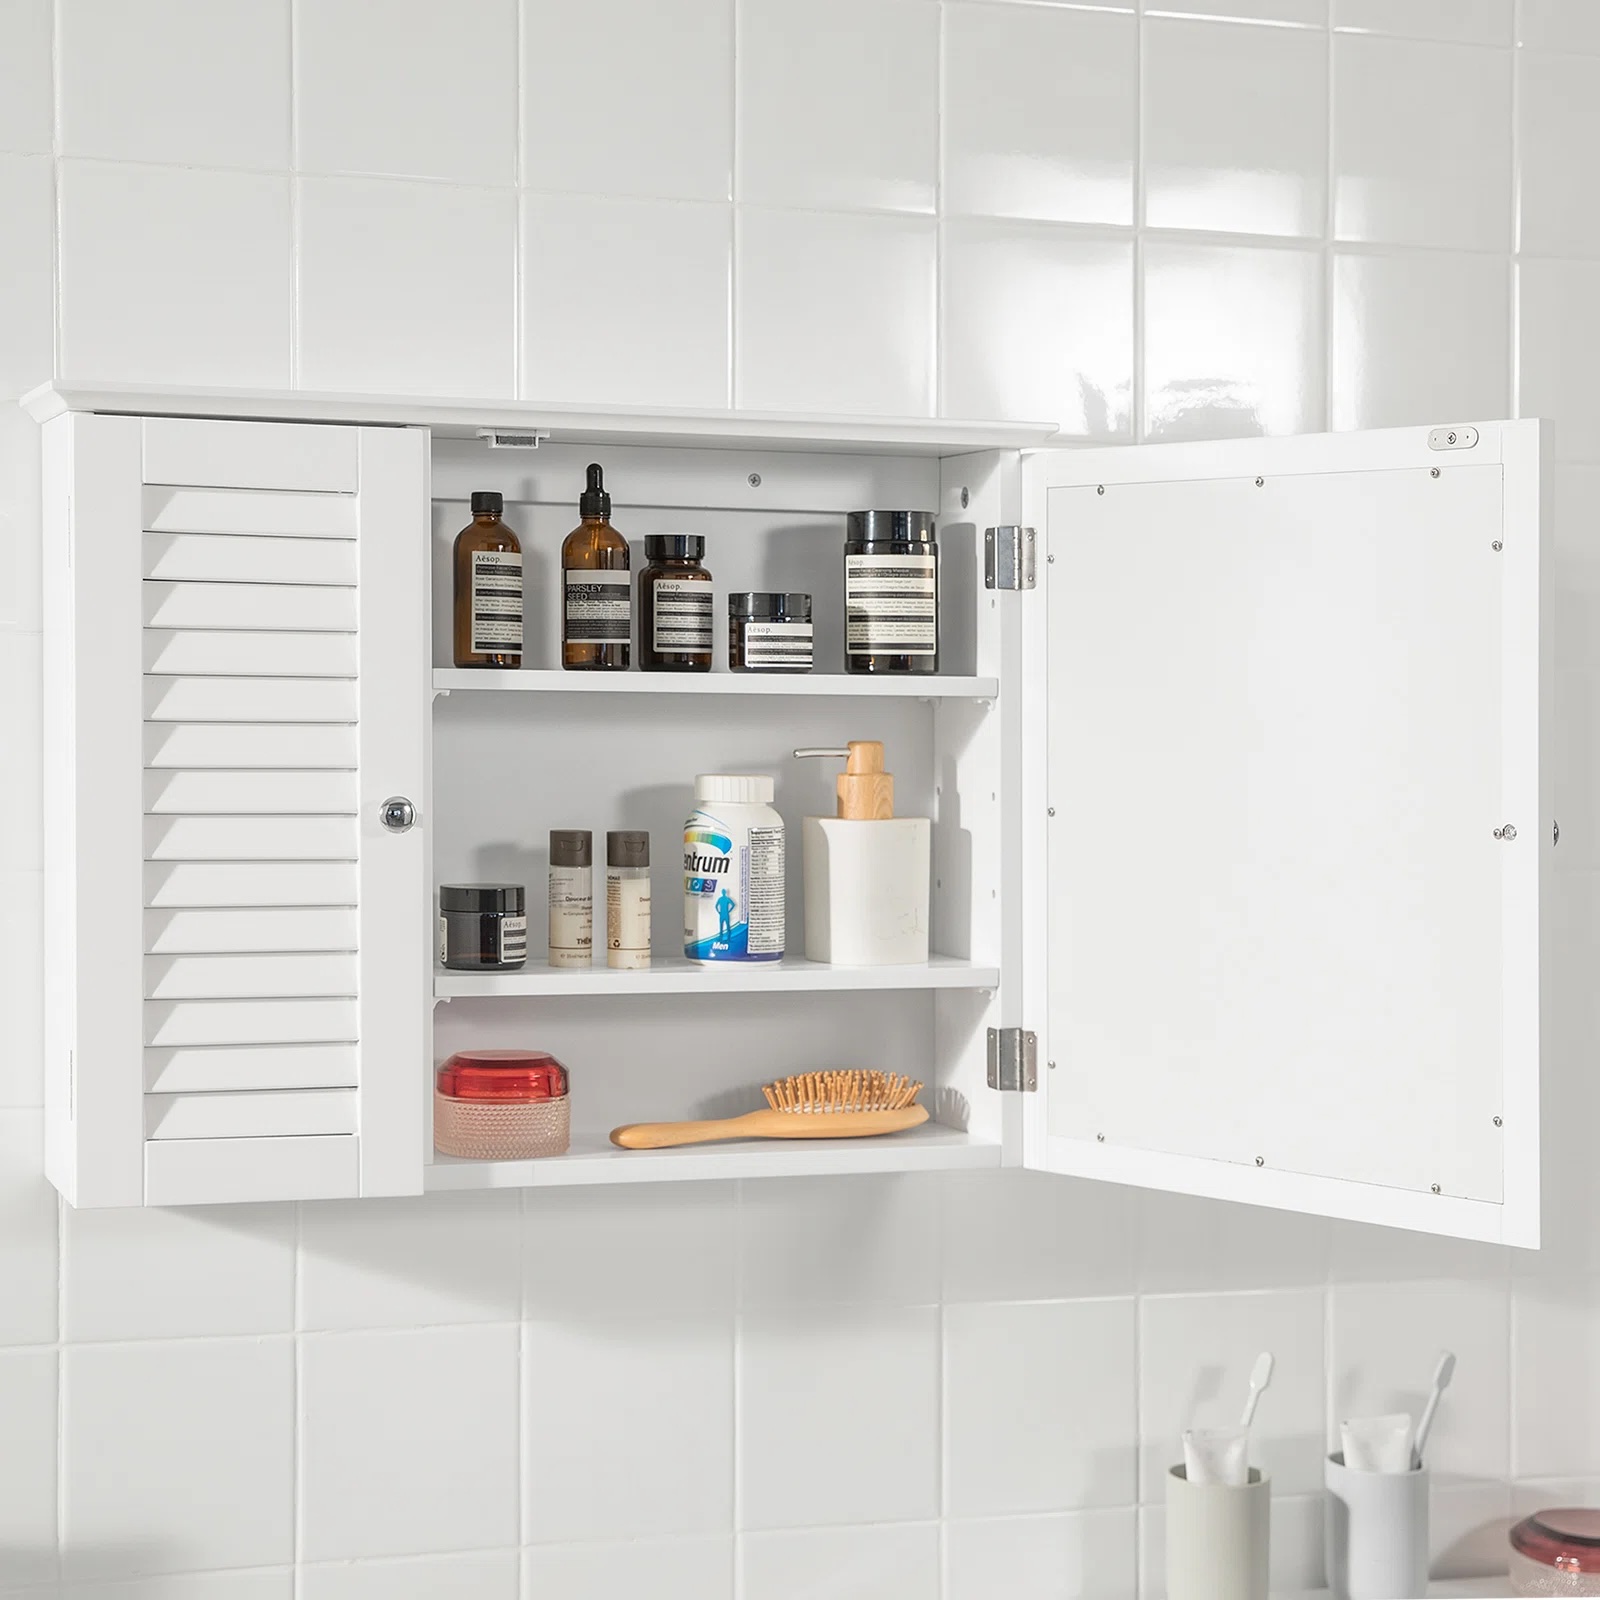 How To Install A Medicine Cabinet In The Wall